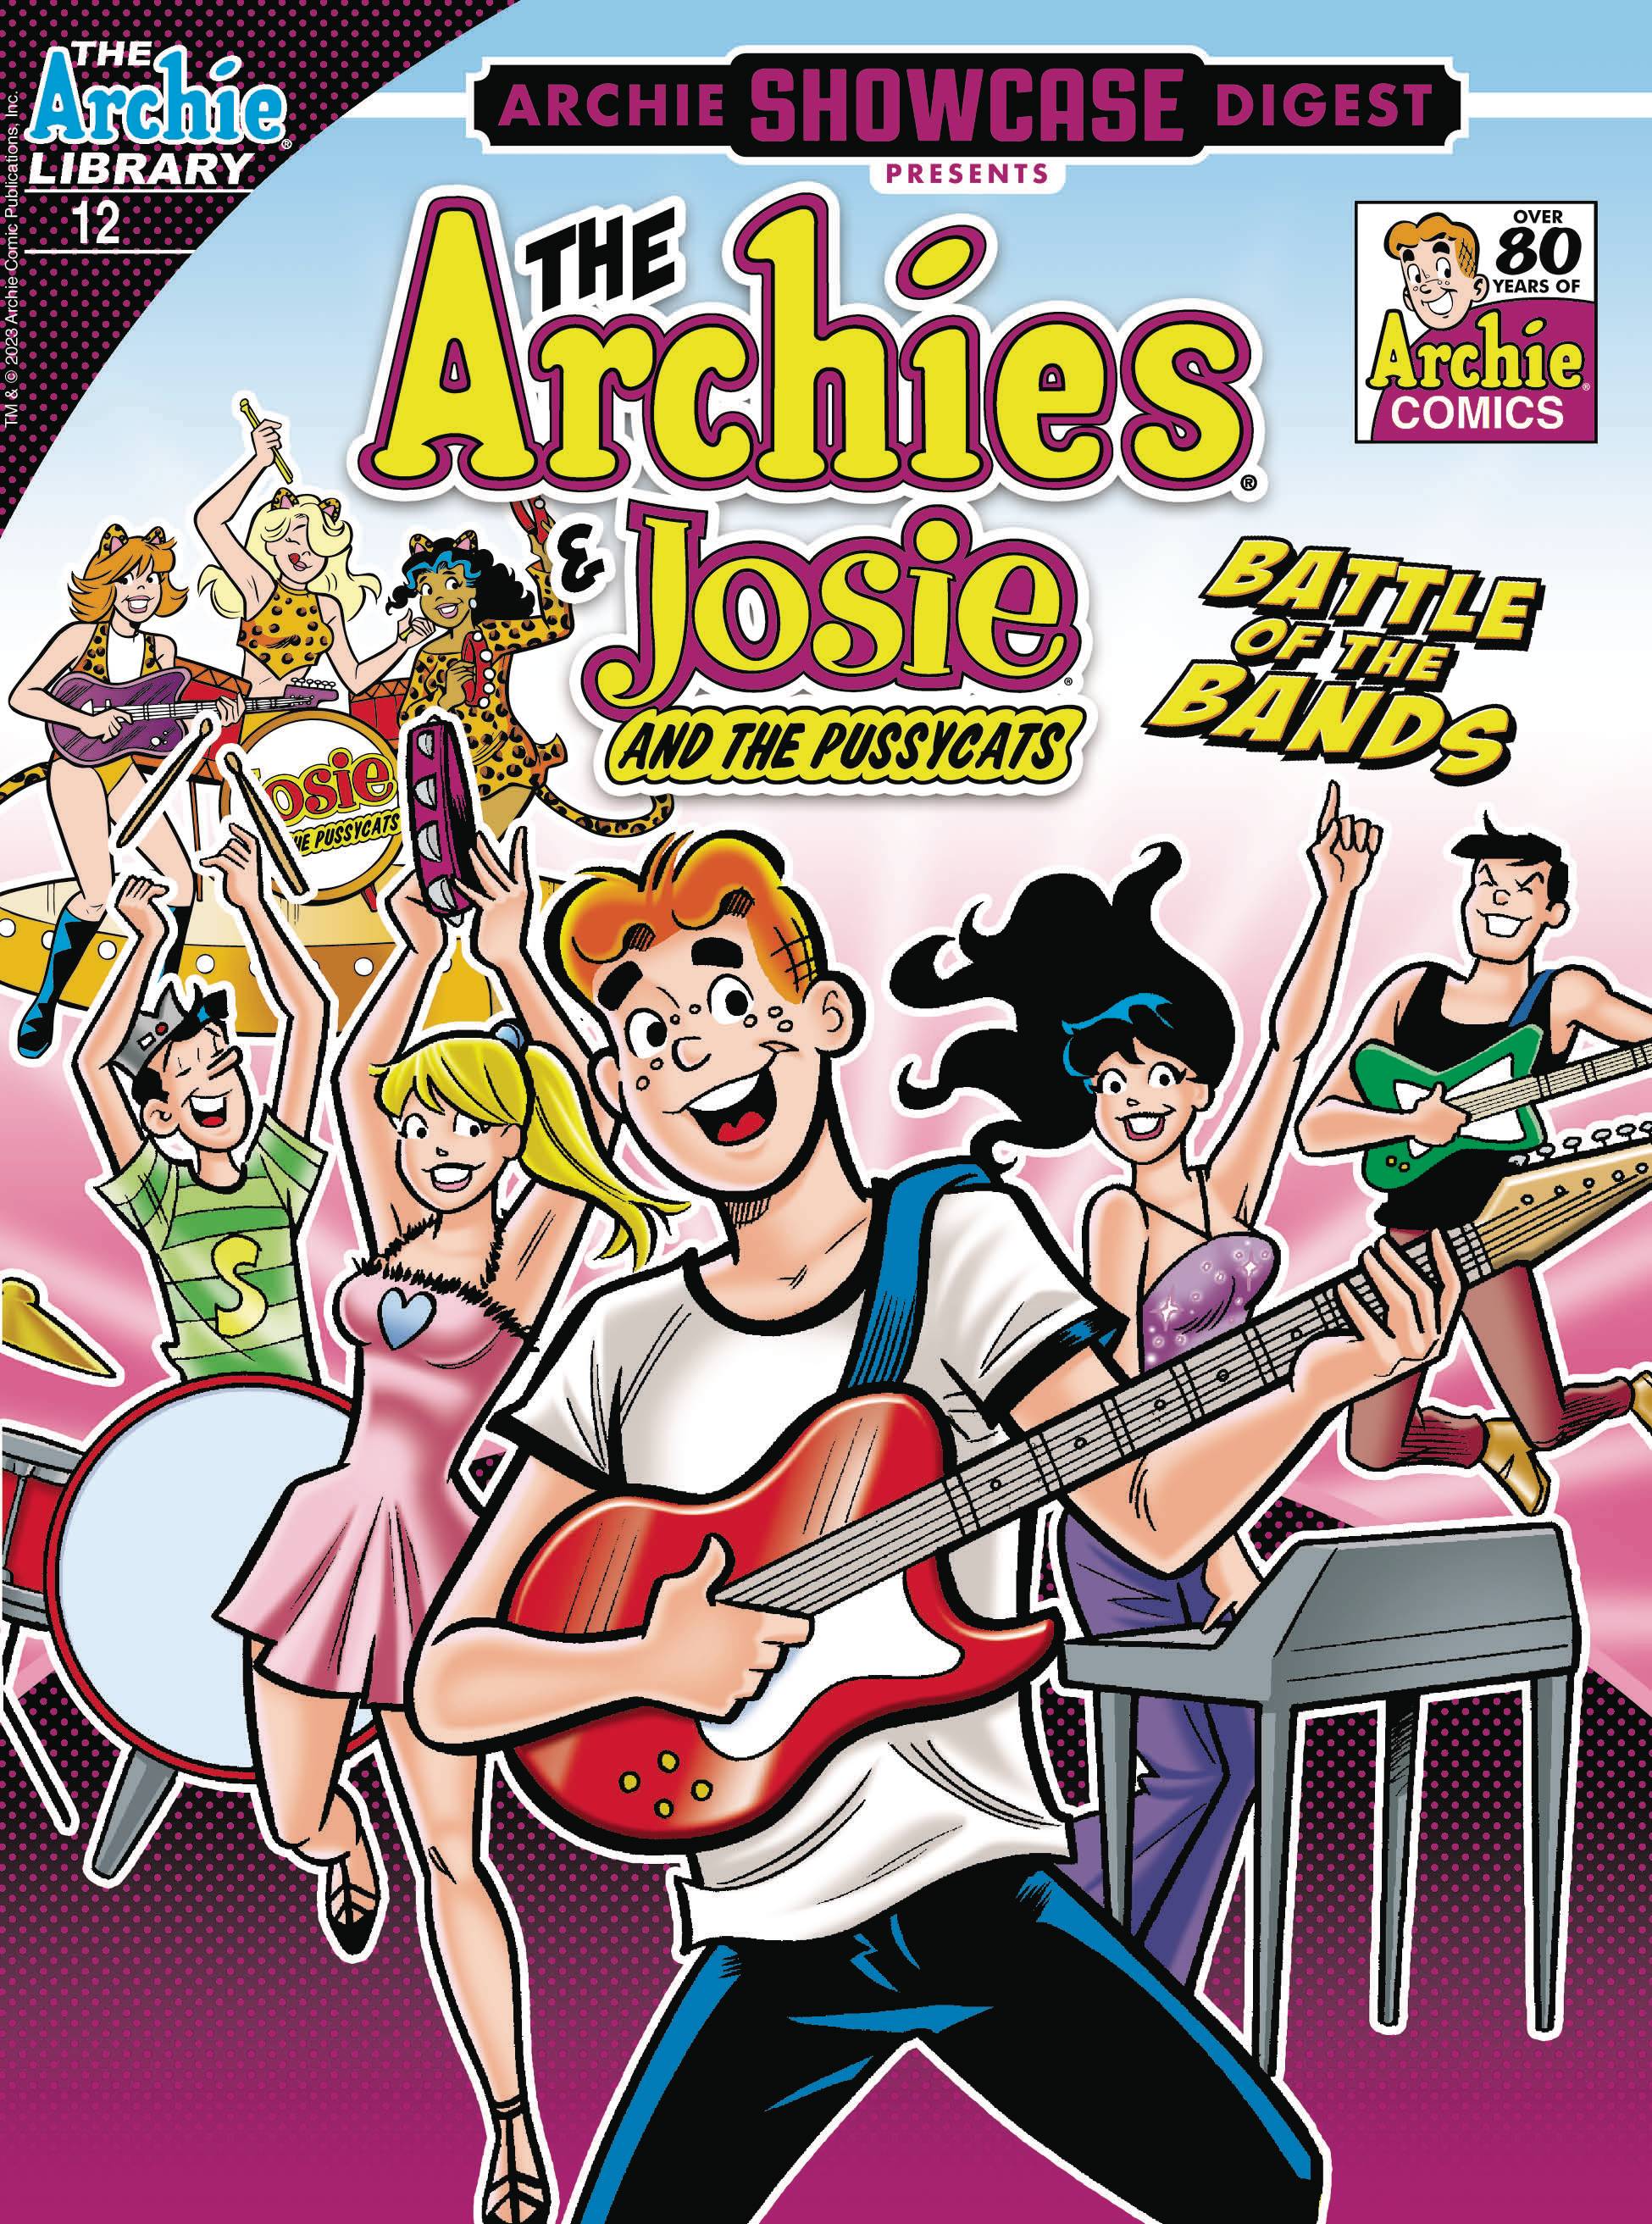 ARCHIE SHOWCASE DIGEST #12 ARCHIES & JOSIE AND PUSSYCATS